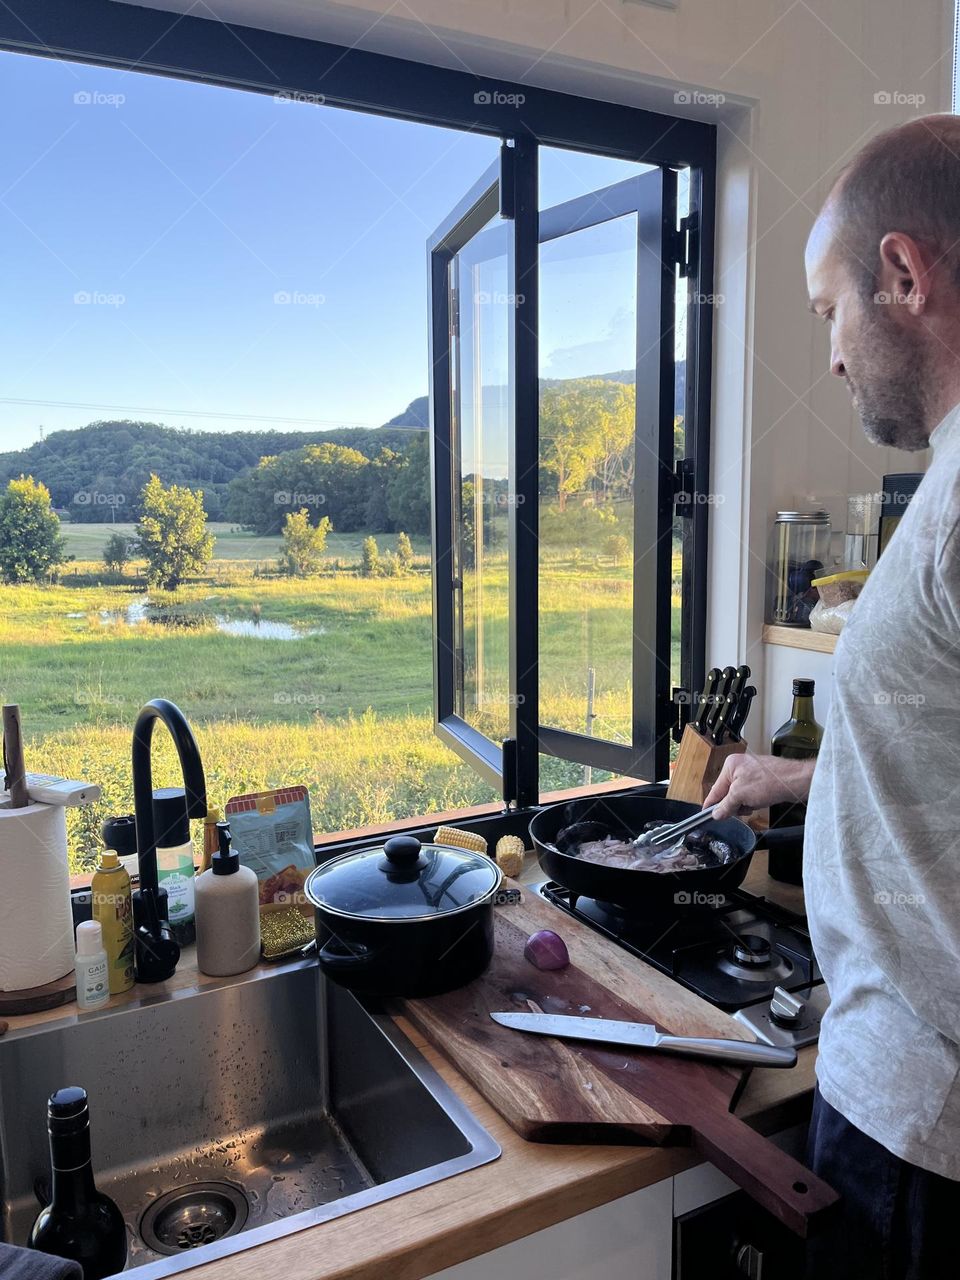 Cooking dinner with views 